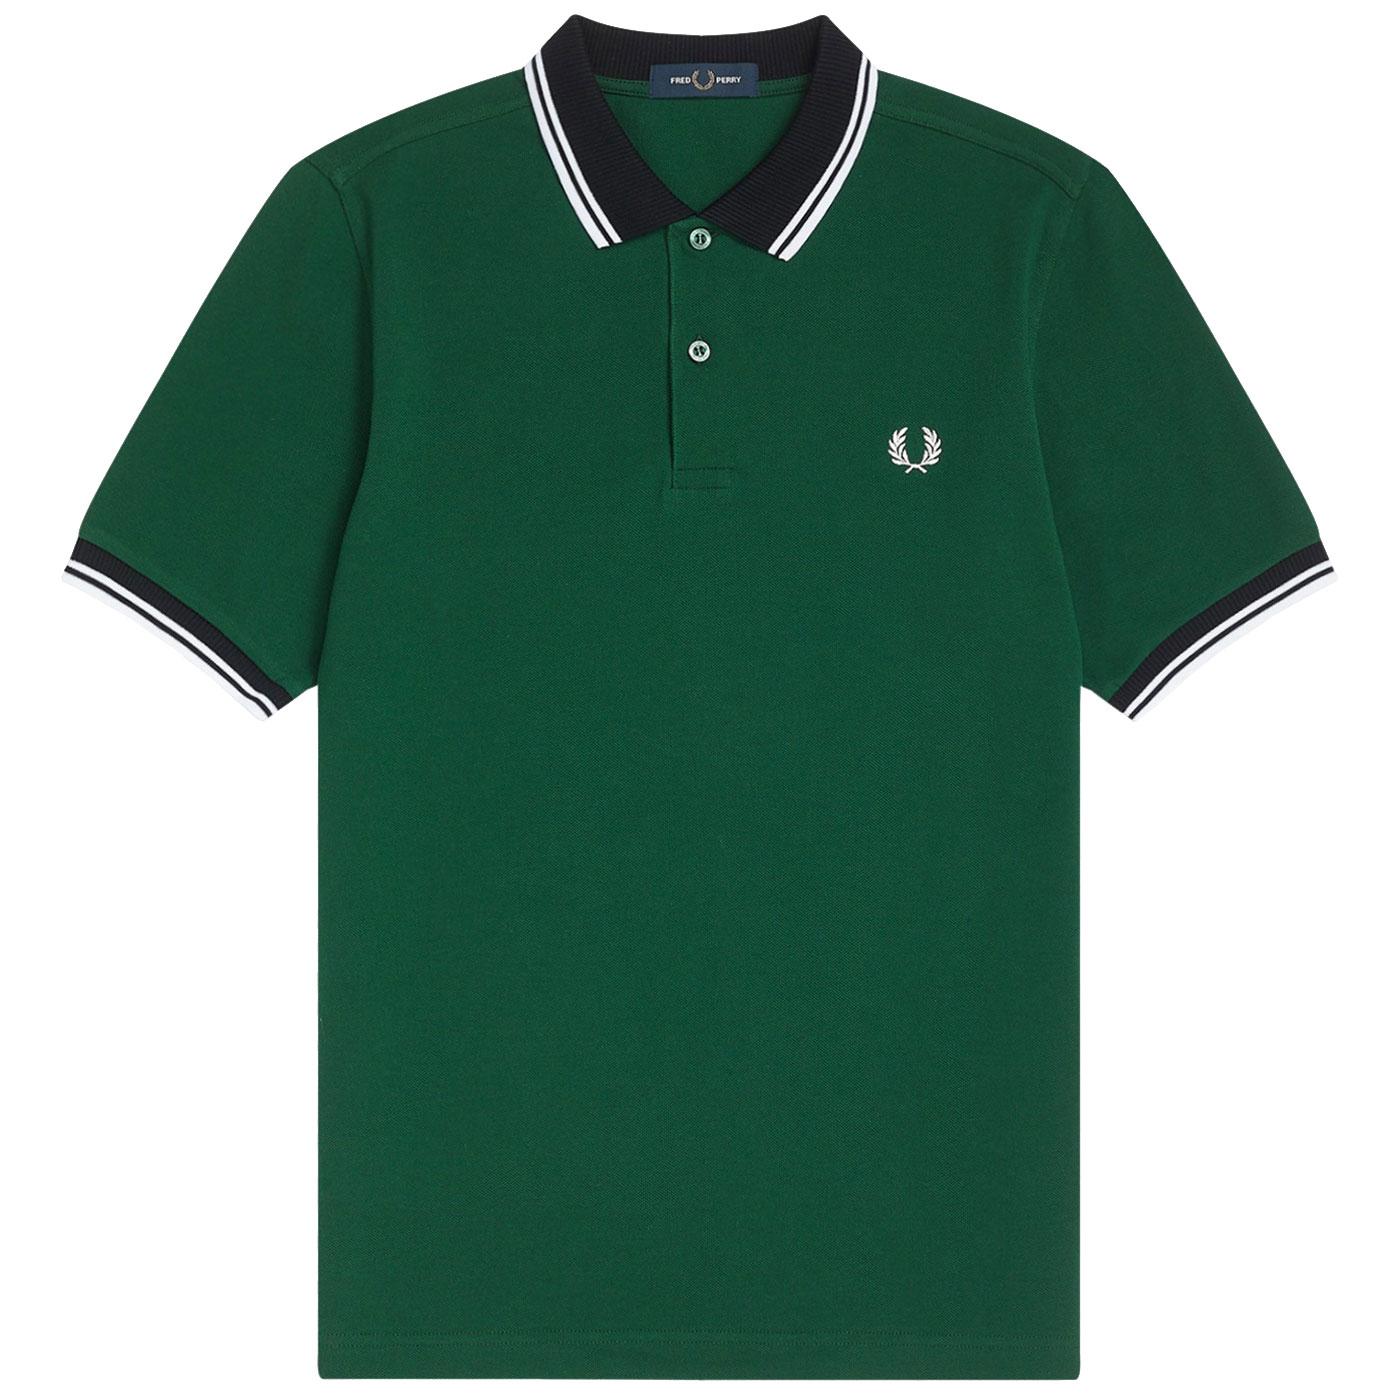 FRED PERRY Contrast Trim Mod Pique Polo Shirt in Ivy